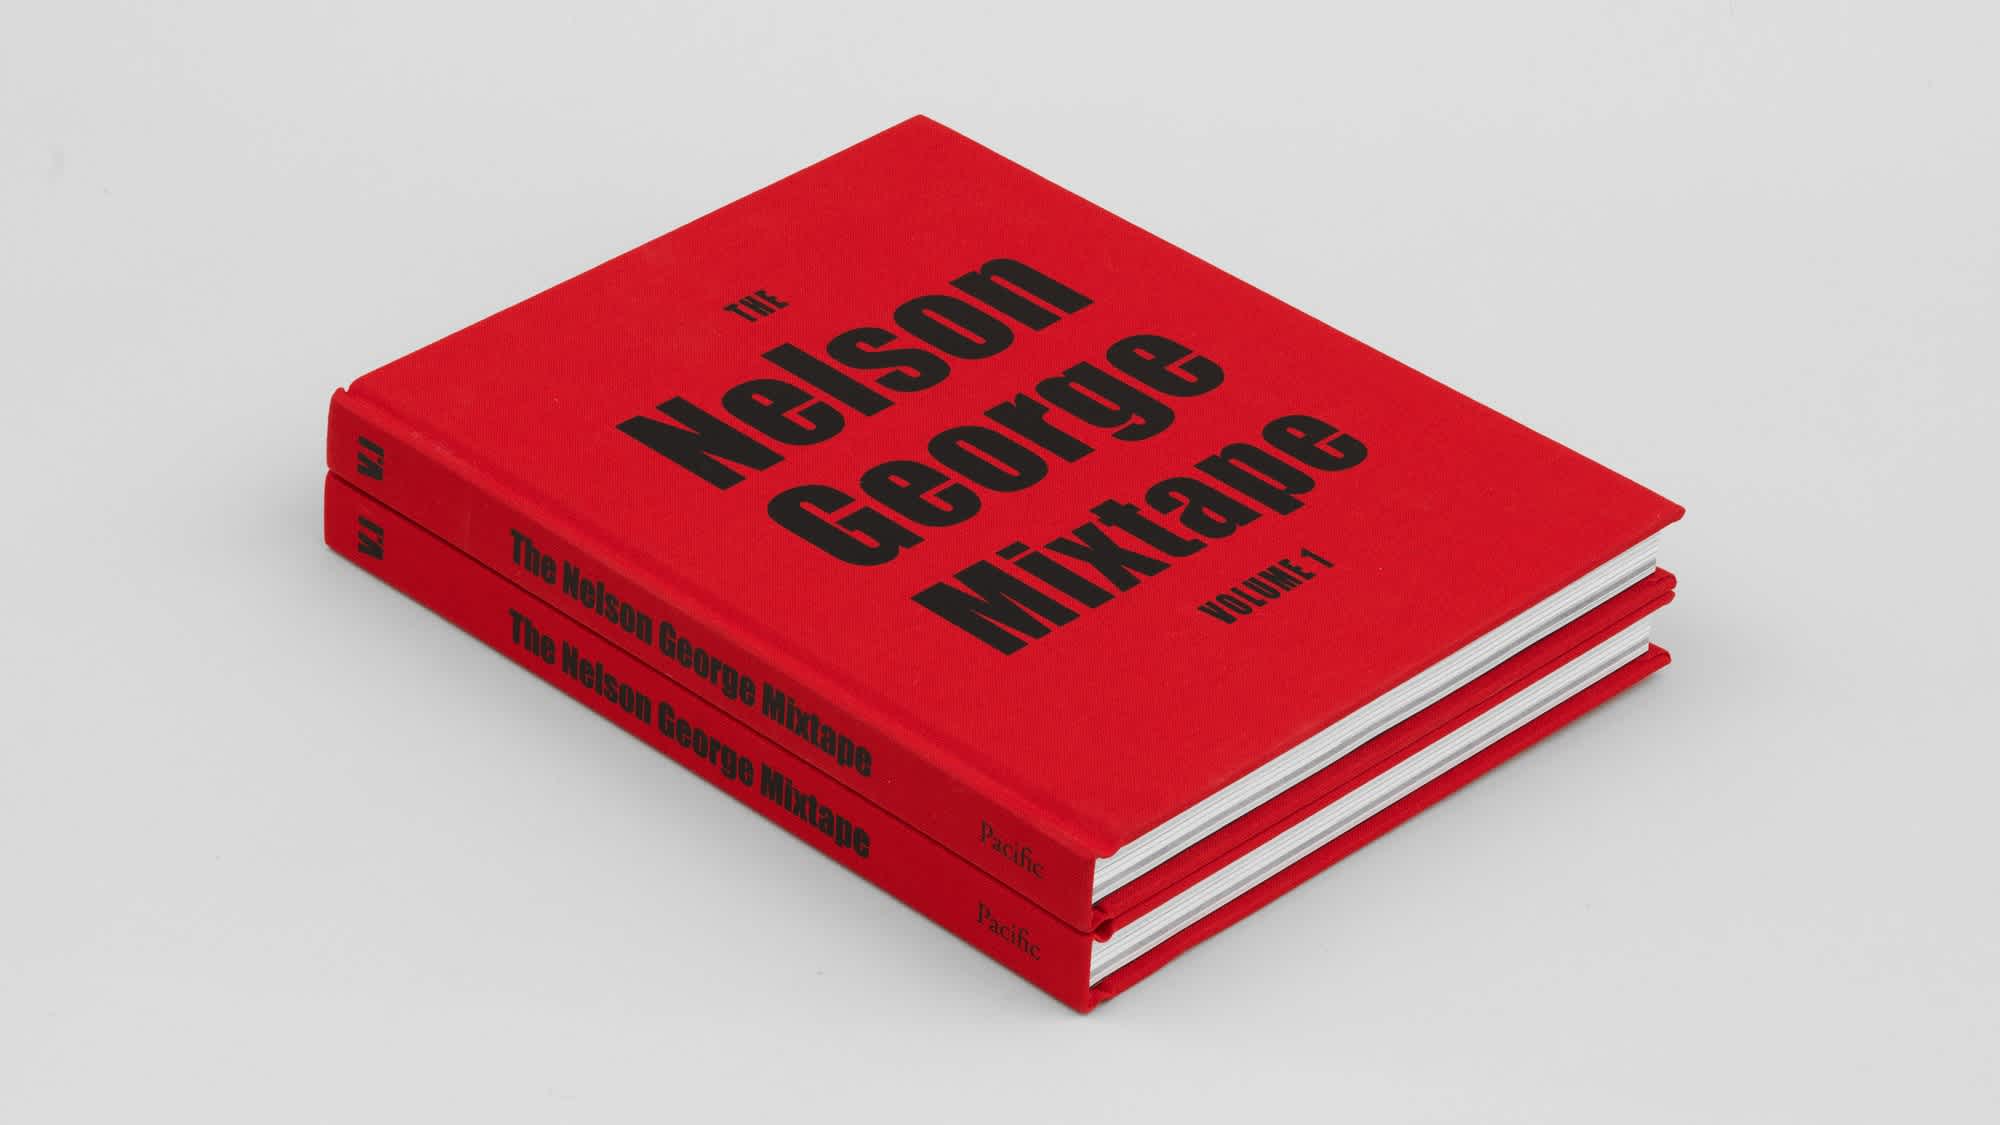 Two bright red books with bold, black title, "The Nelson George Mixtape, Vol. 1" on the front cover. The two books are stacked on top of each other and run diagonally across the plane.